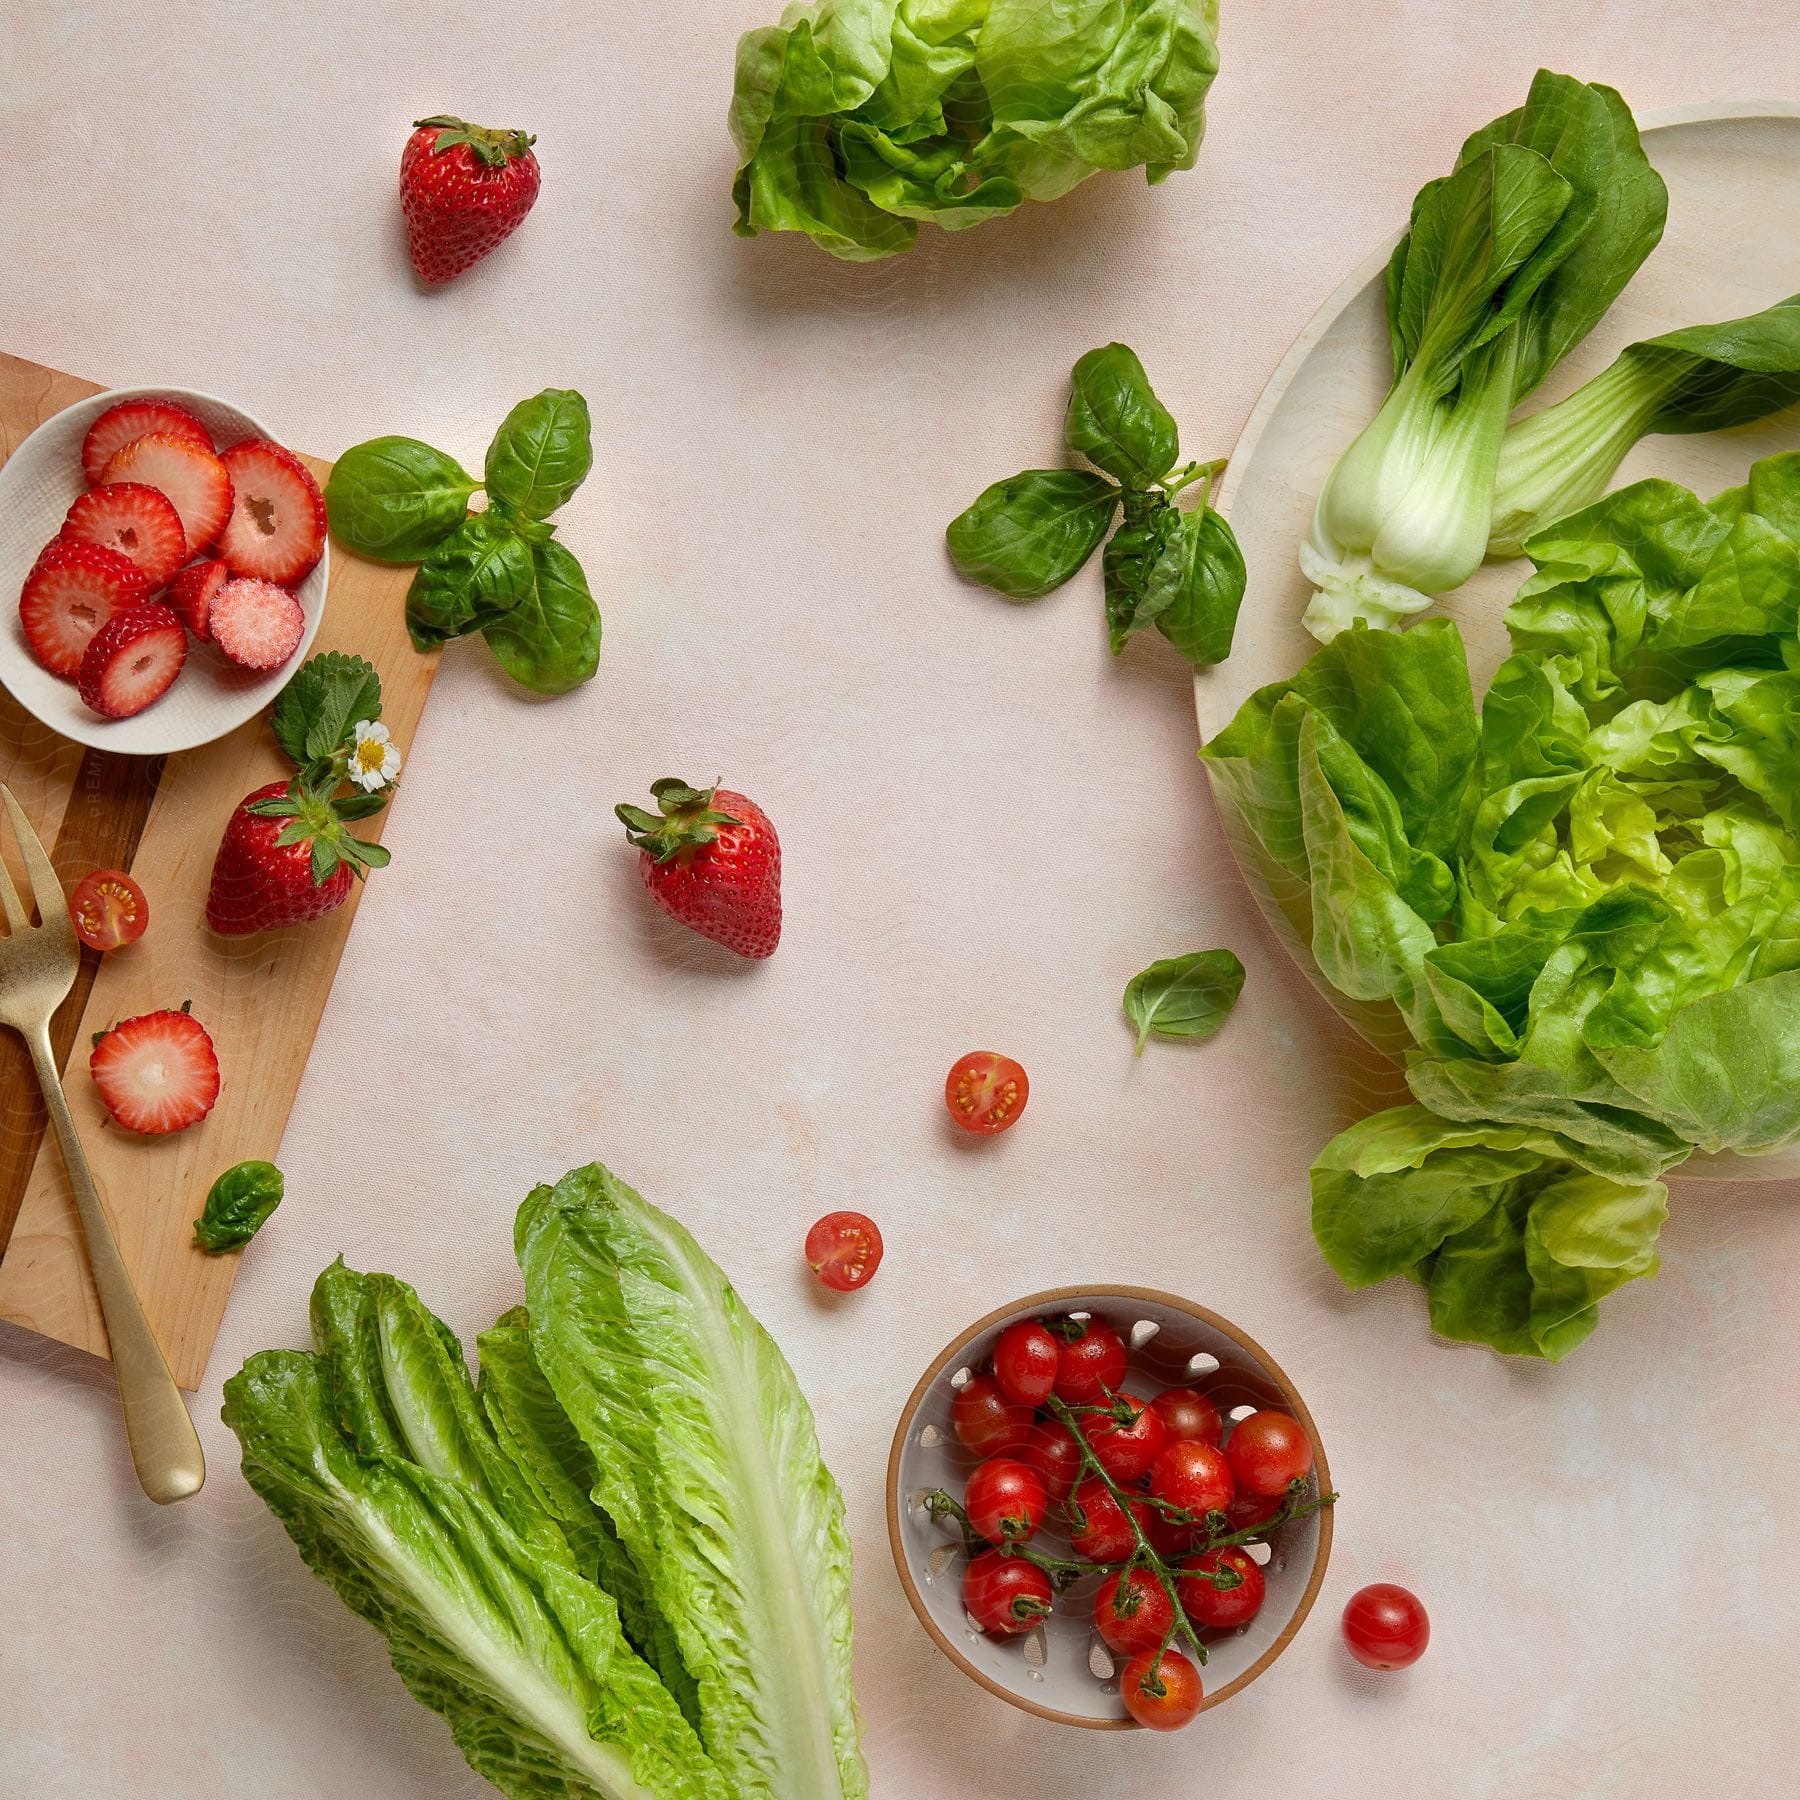 Various fresh vegetables and fruits arranged on a light pink surface; includes whole and sliced strawberries in a bowl, cherry tomatoes, lettuce, bok choy, and basil leaves.